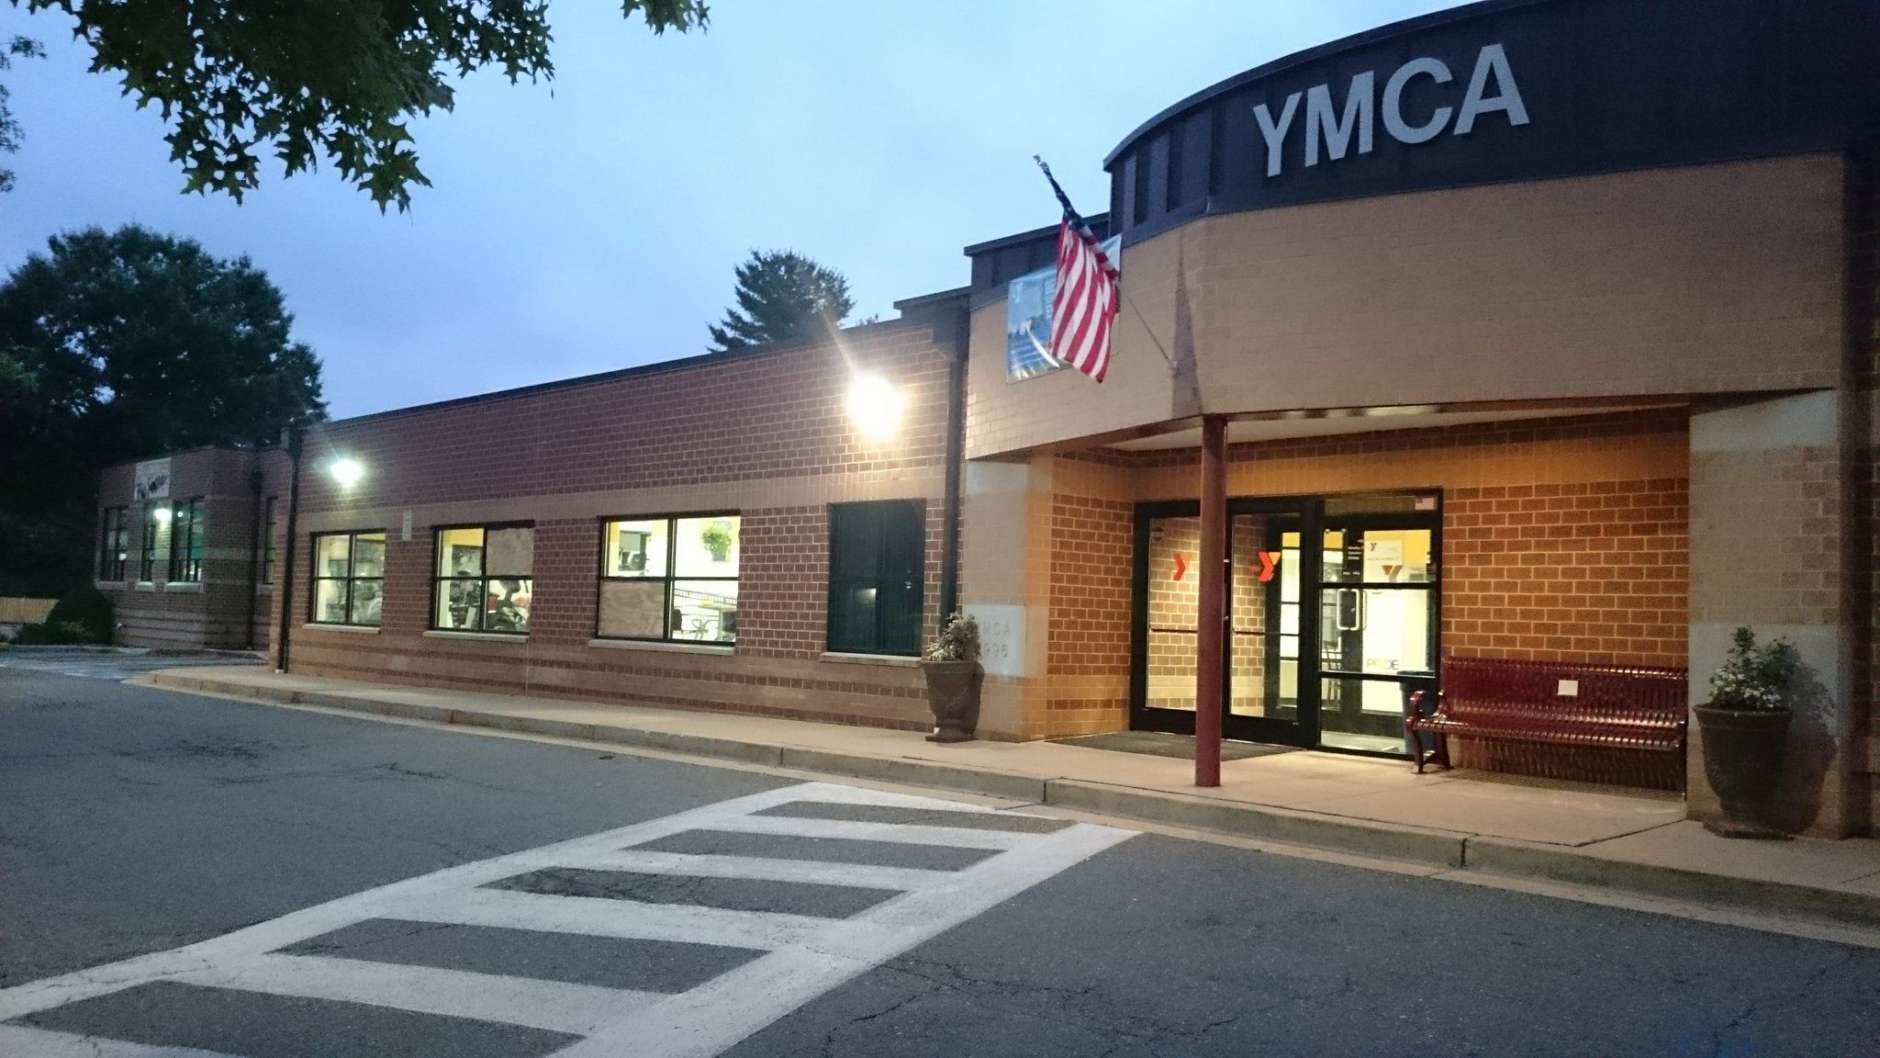 The Alexandria YMCA and Eugene Simpson Stadium are both back open Saturday after Wednesday's baseball practice shooting. (WTOP/Dennis Foley)